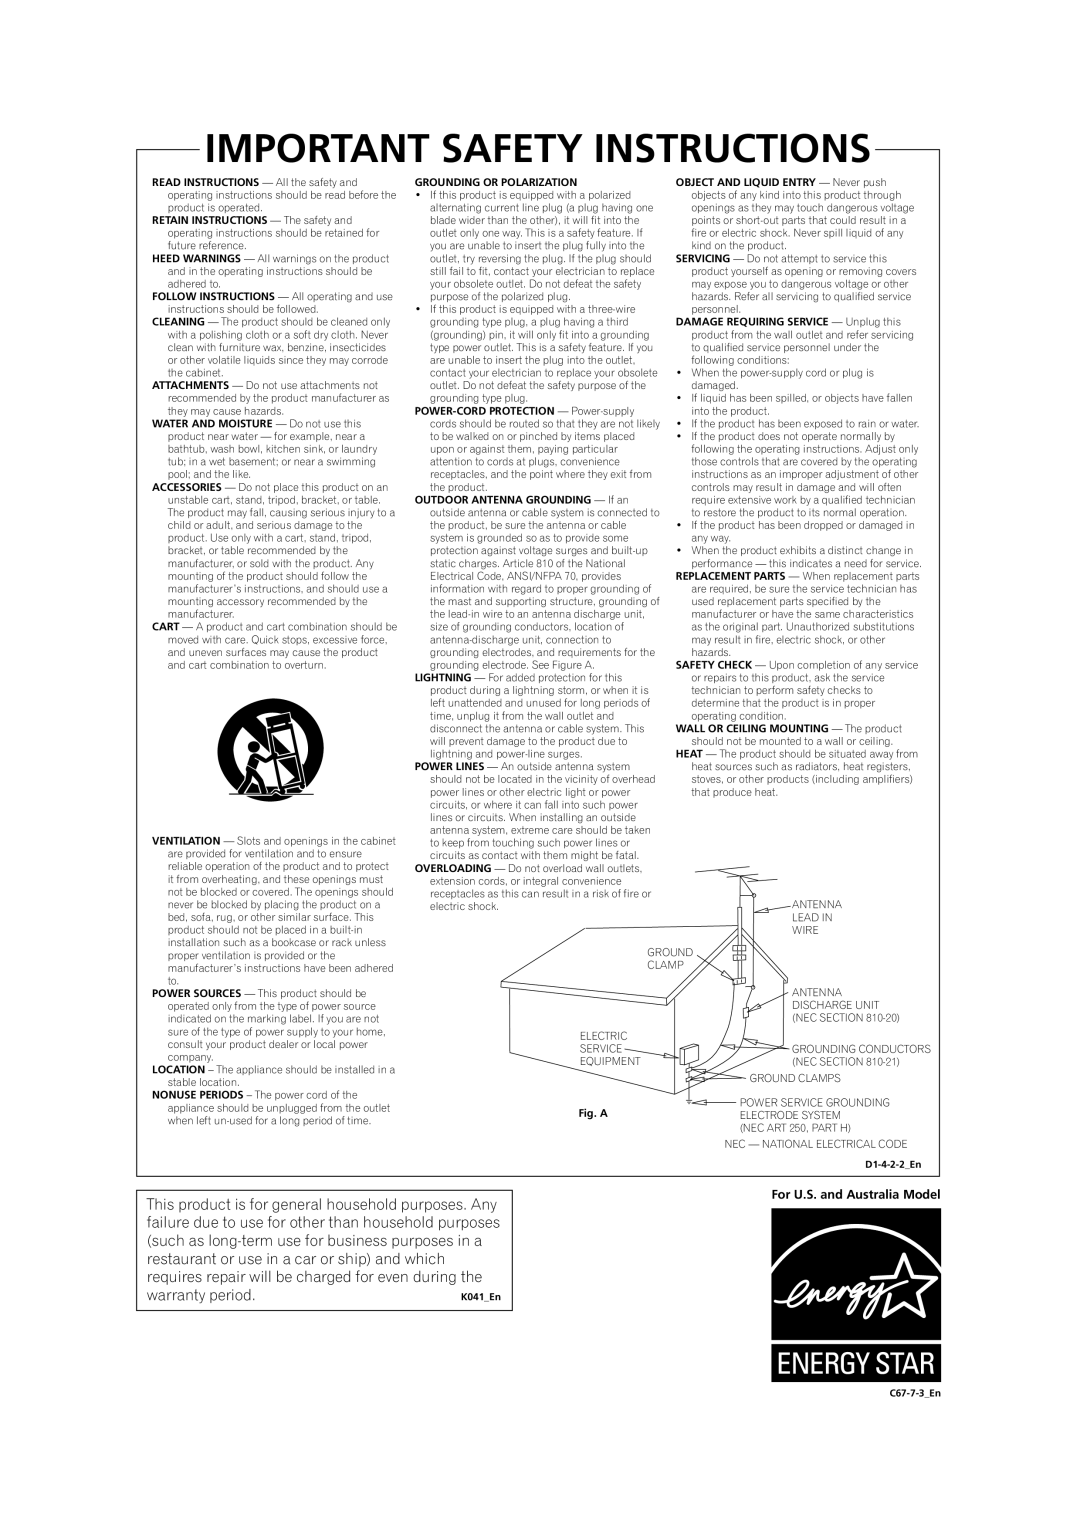 Pioneer VSX-9300TX manual Important Safety Instructions, For U.S. and Australia Model 